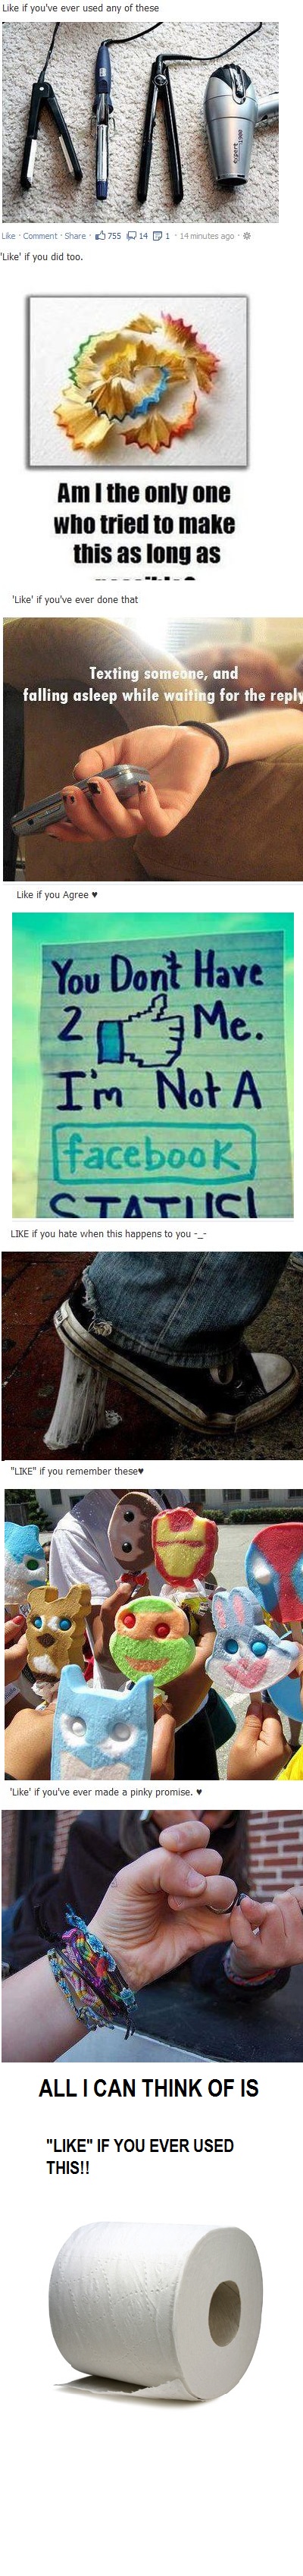 Every Time I Am On Facebook And See These!